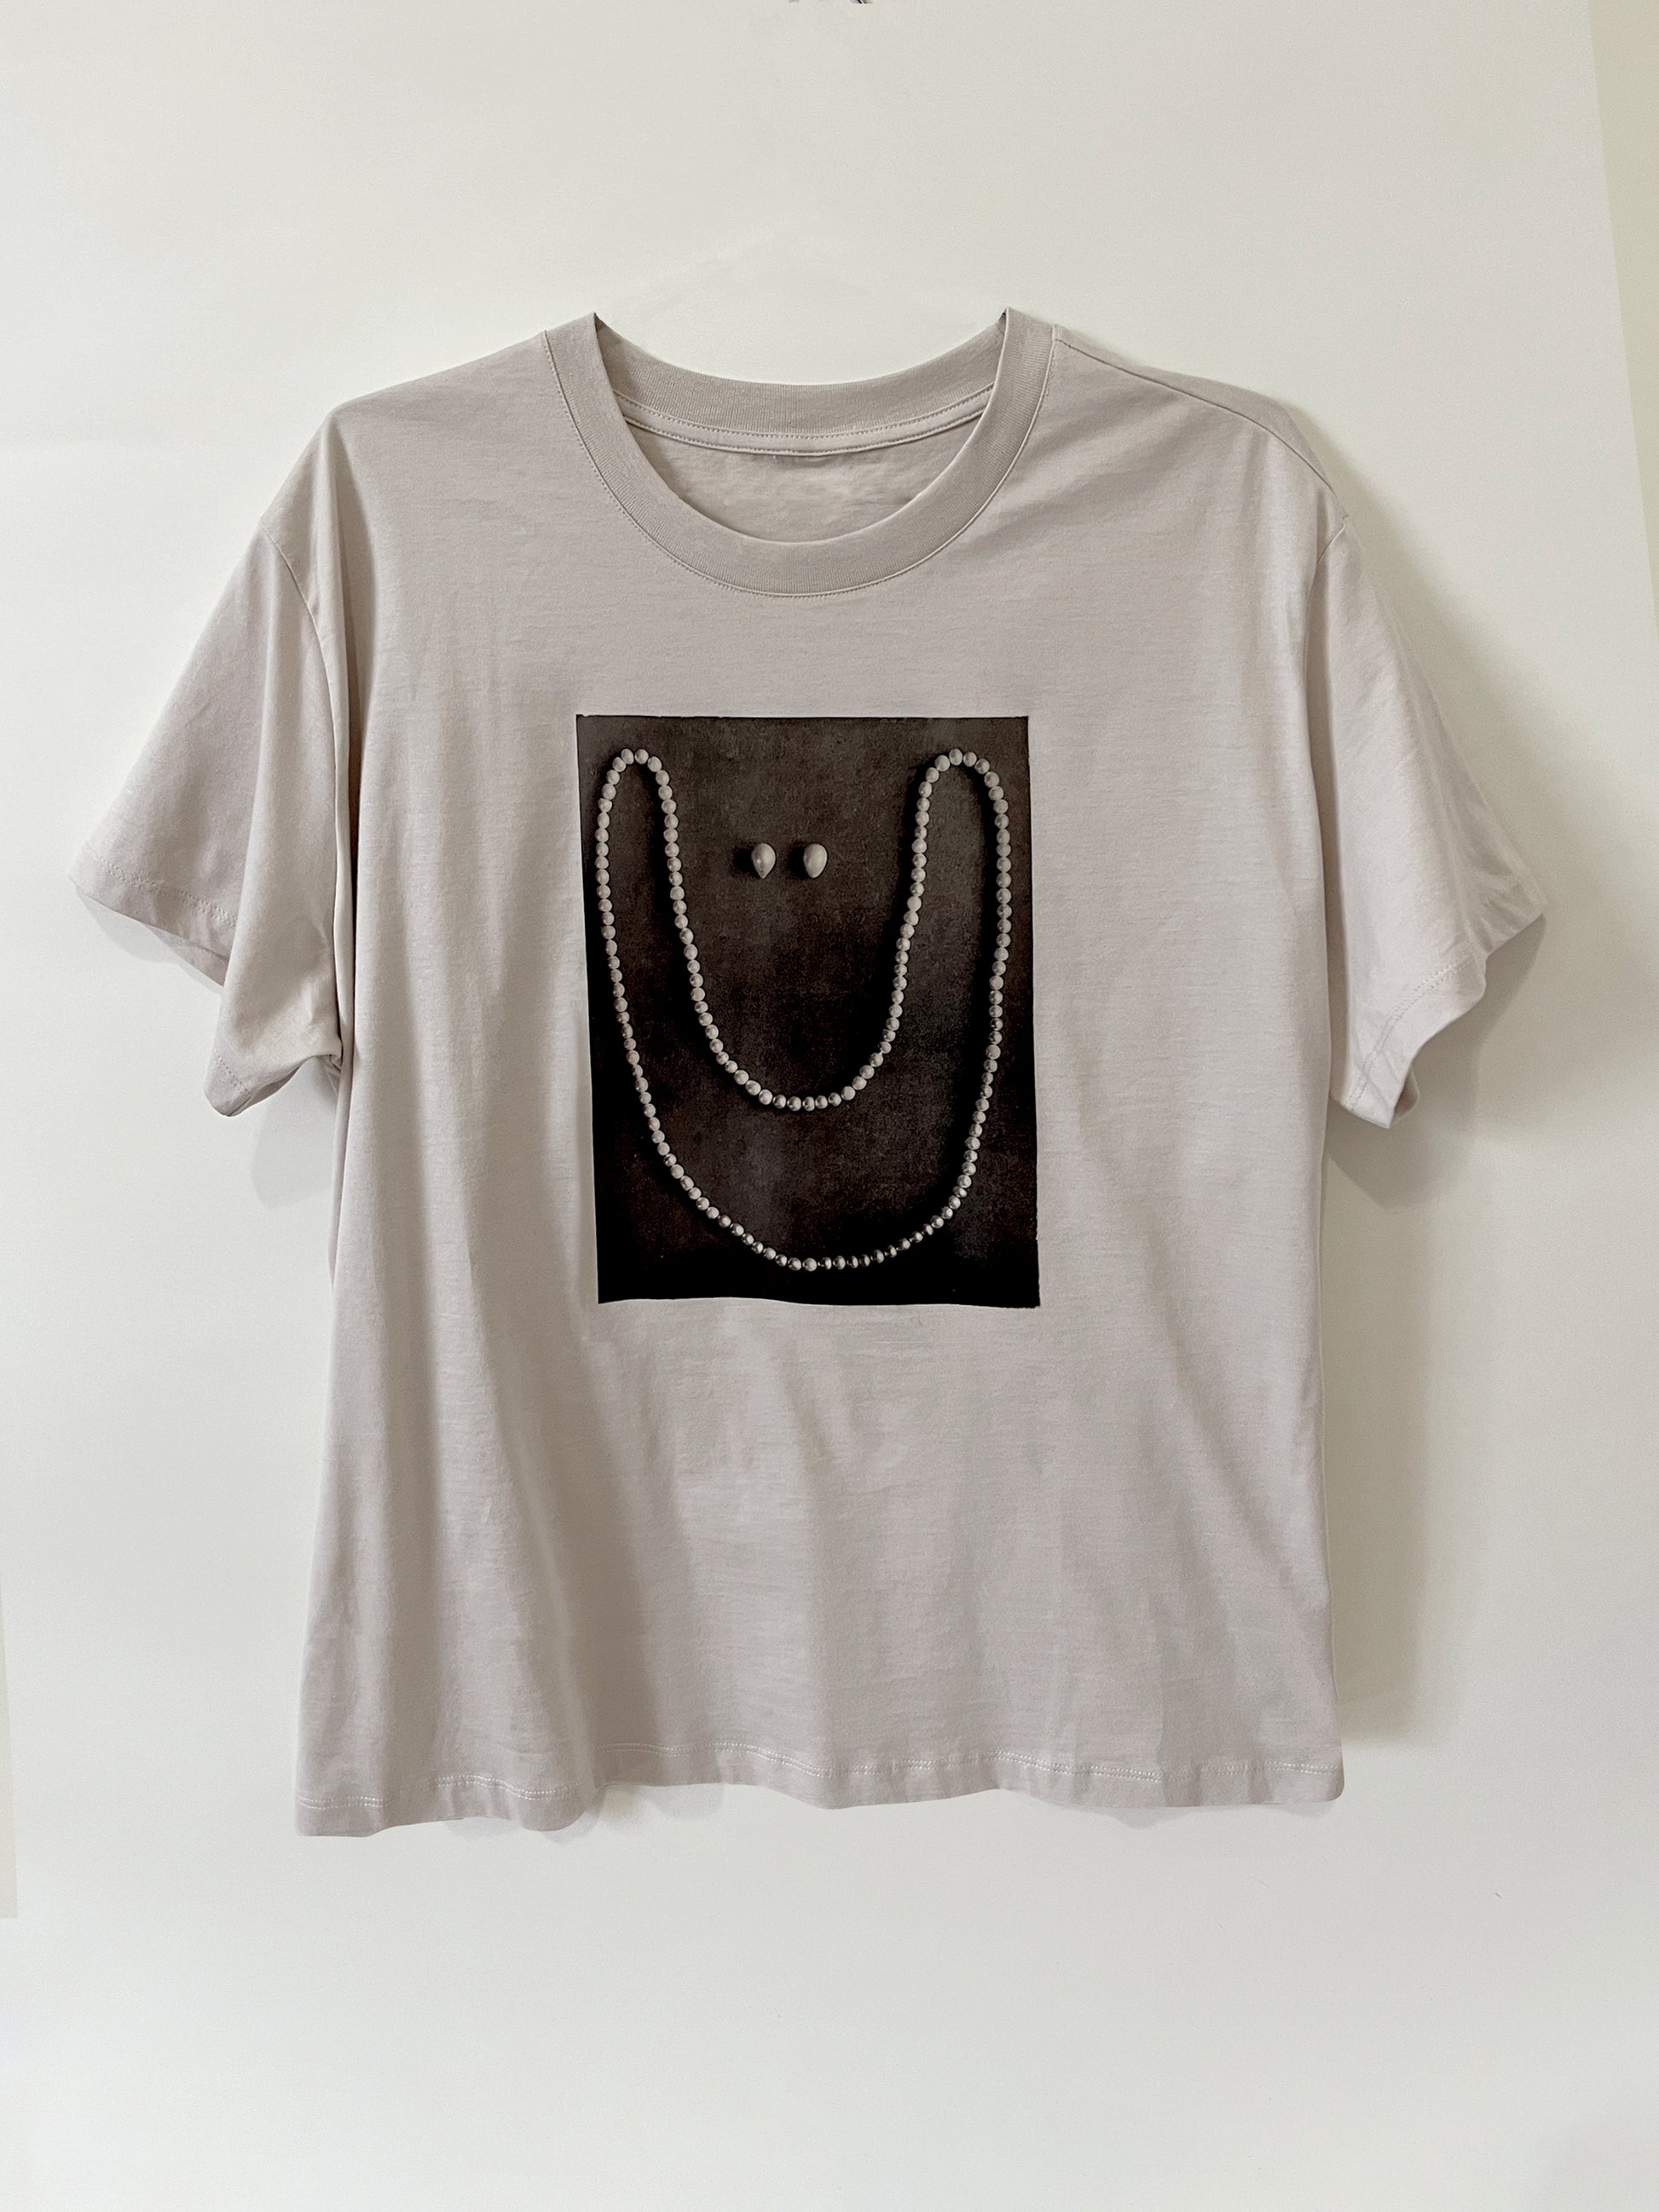 Product photo of Happy As A Clam tee by CLARK. A graphic custom-made gray straight-cut shirt featuring a smile made out of pearls. It is an artist made to order item, available in s/m and l/xl.